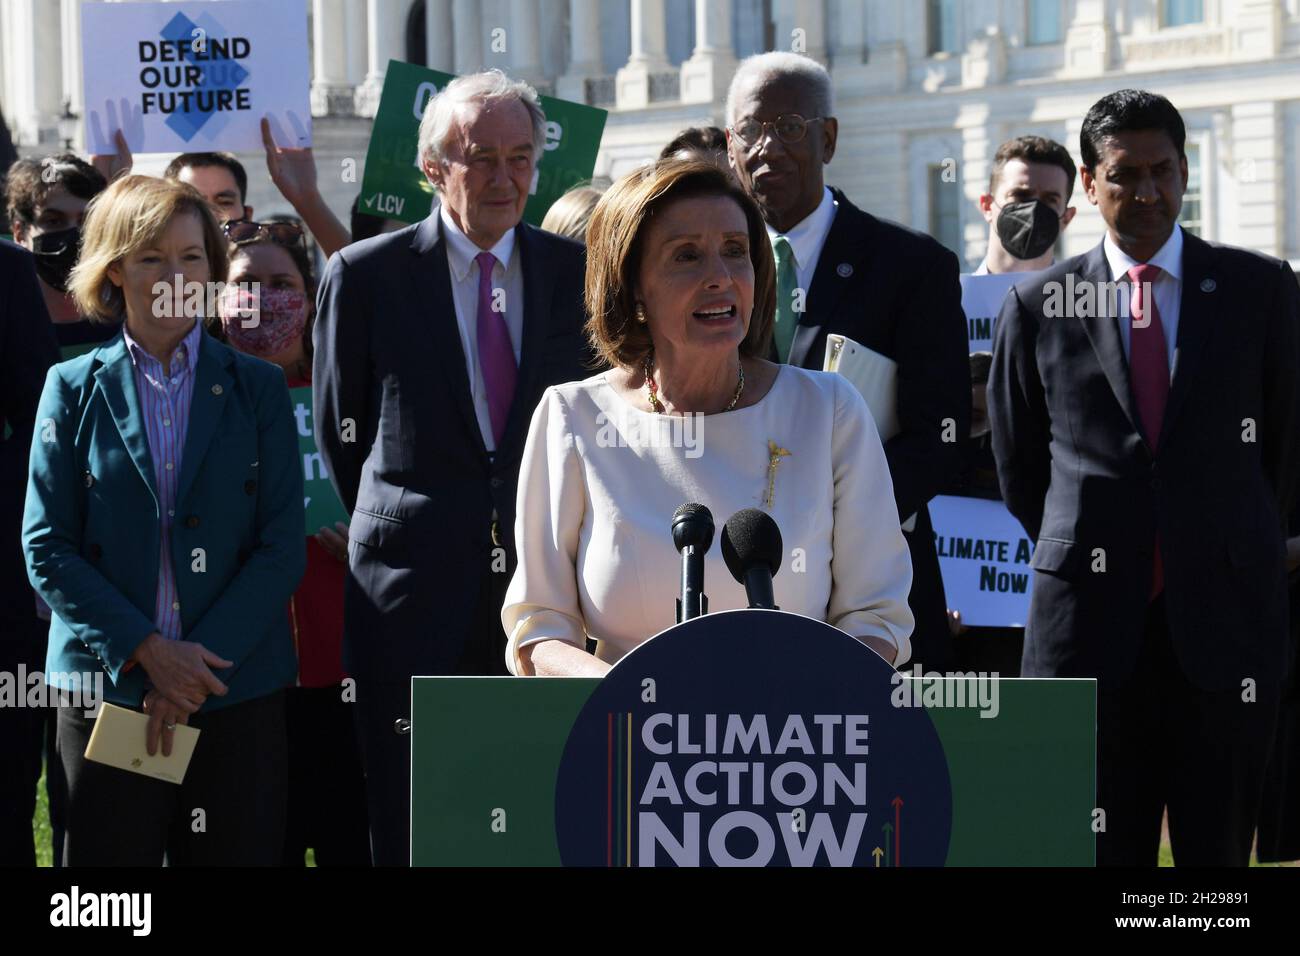 House Speaker Nancy Pelosi (D-CA) talks about Climate Change Action during a press conference at Senate Swamp / Capitol Hill. (Photo by L Nolly / SOPA Images/Sipa USA) Stock Photo